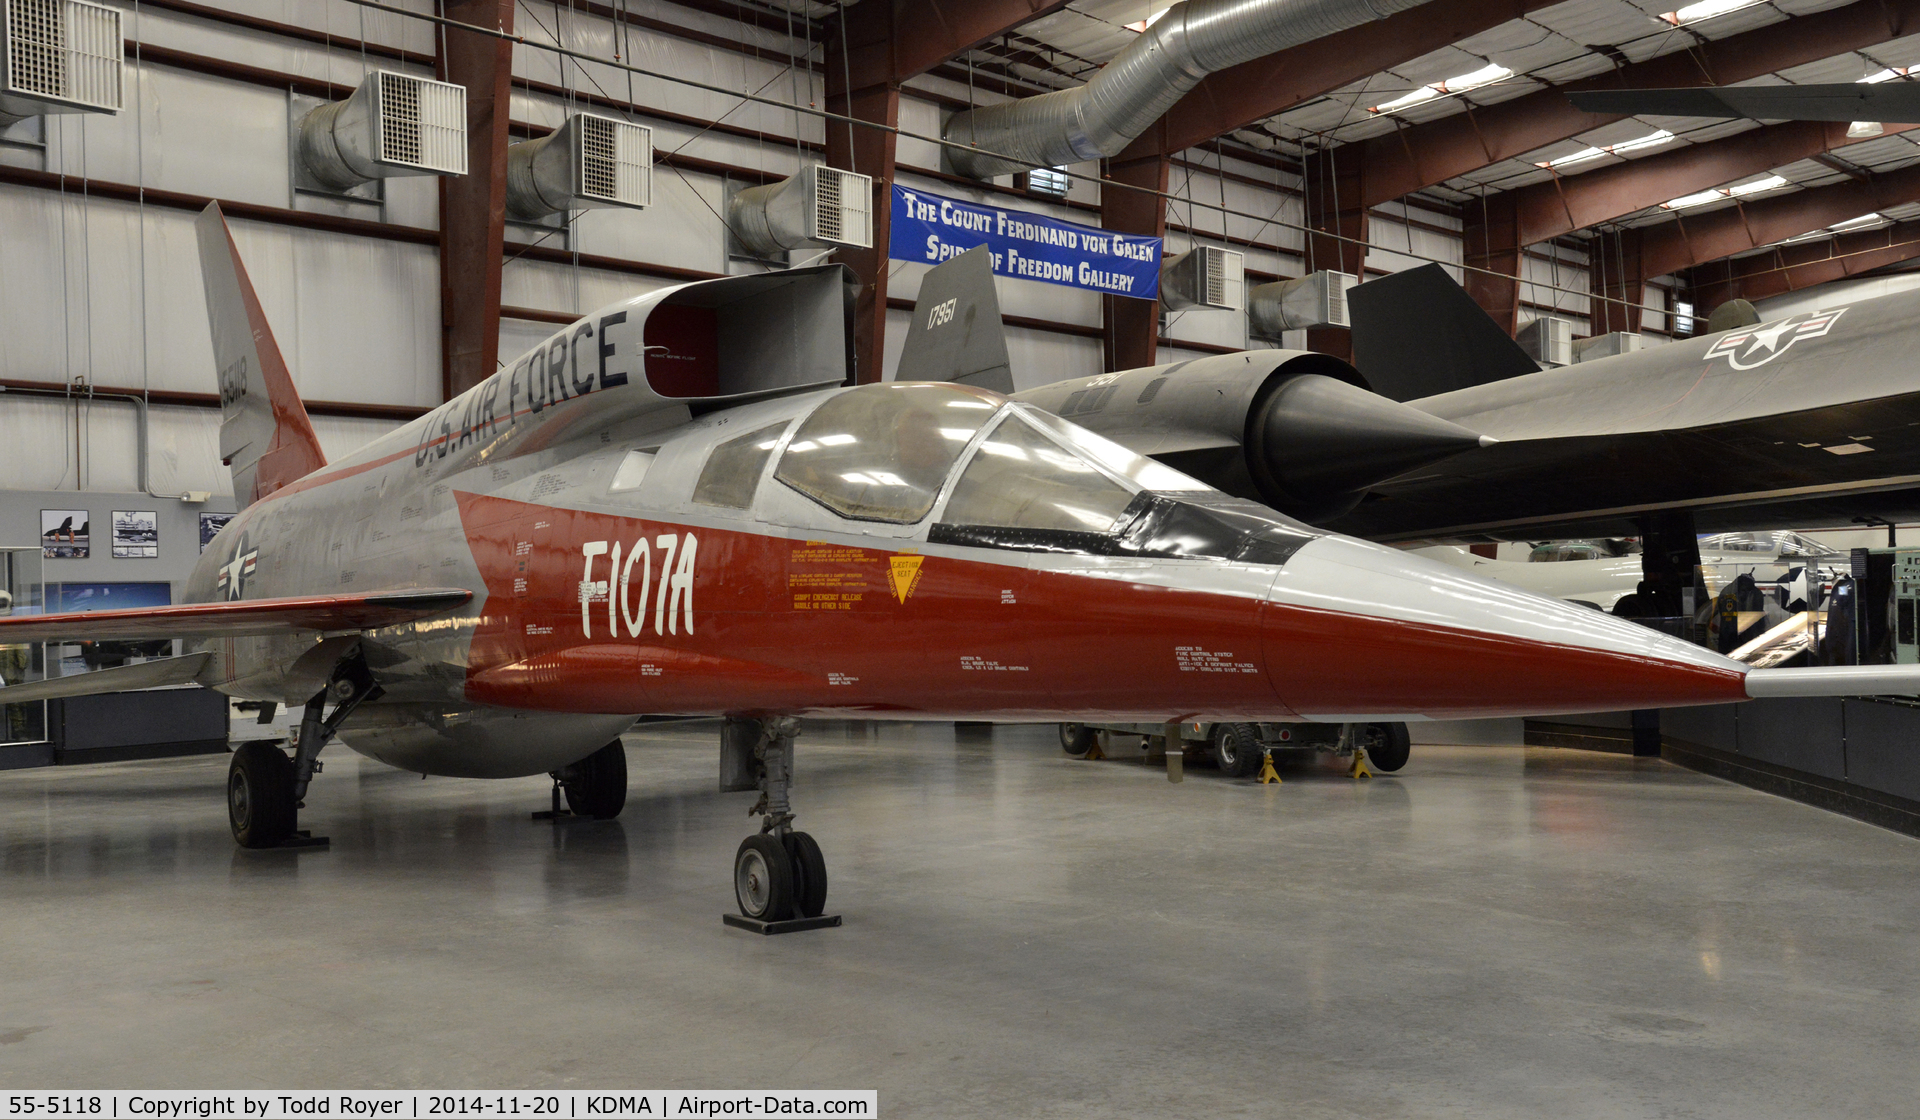 55-5118, 1955 North American F-107A C/N 212-1, On display at the Pima Air and Space Museum